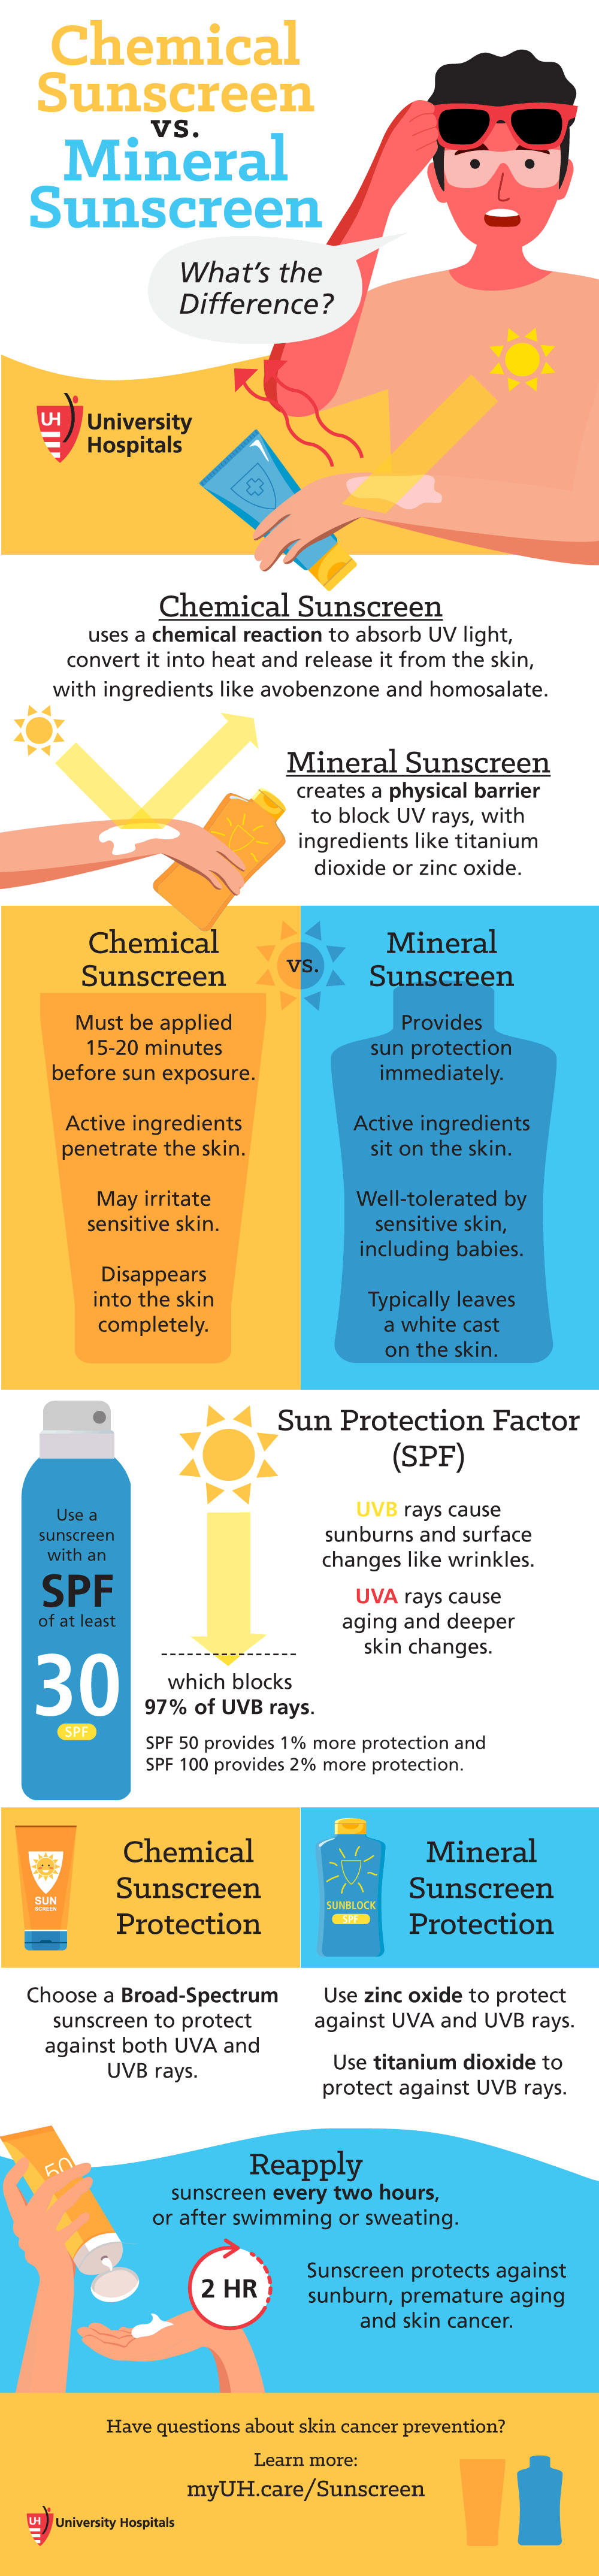 Infographic: Sunscreen vs. Sunblock: What's the Difference?